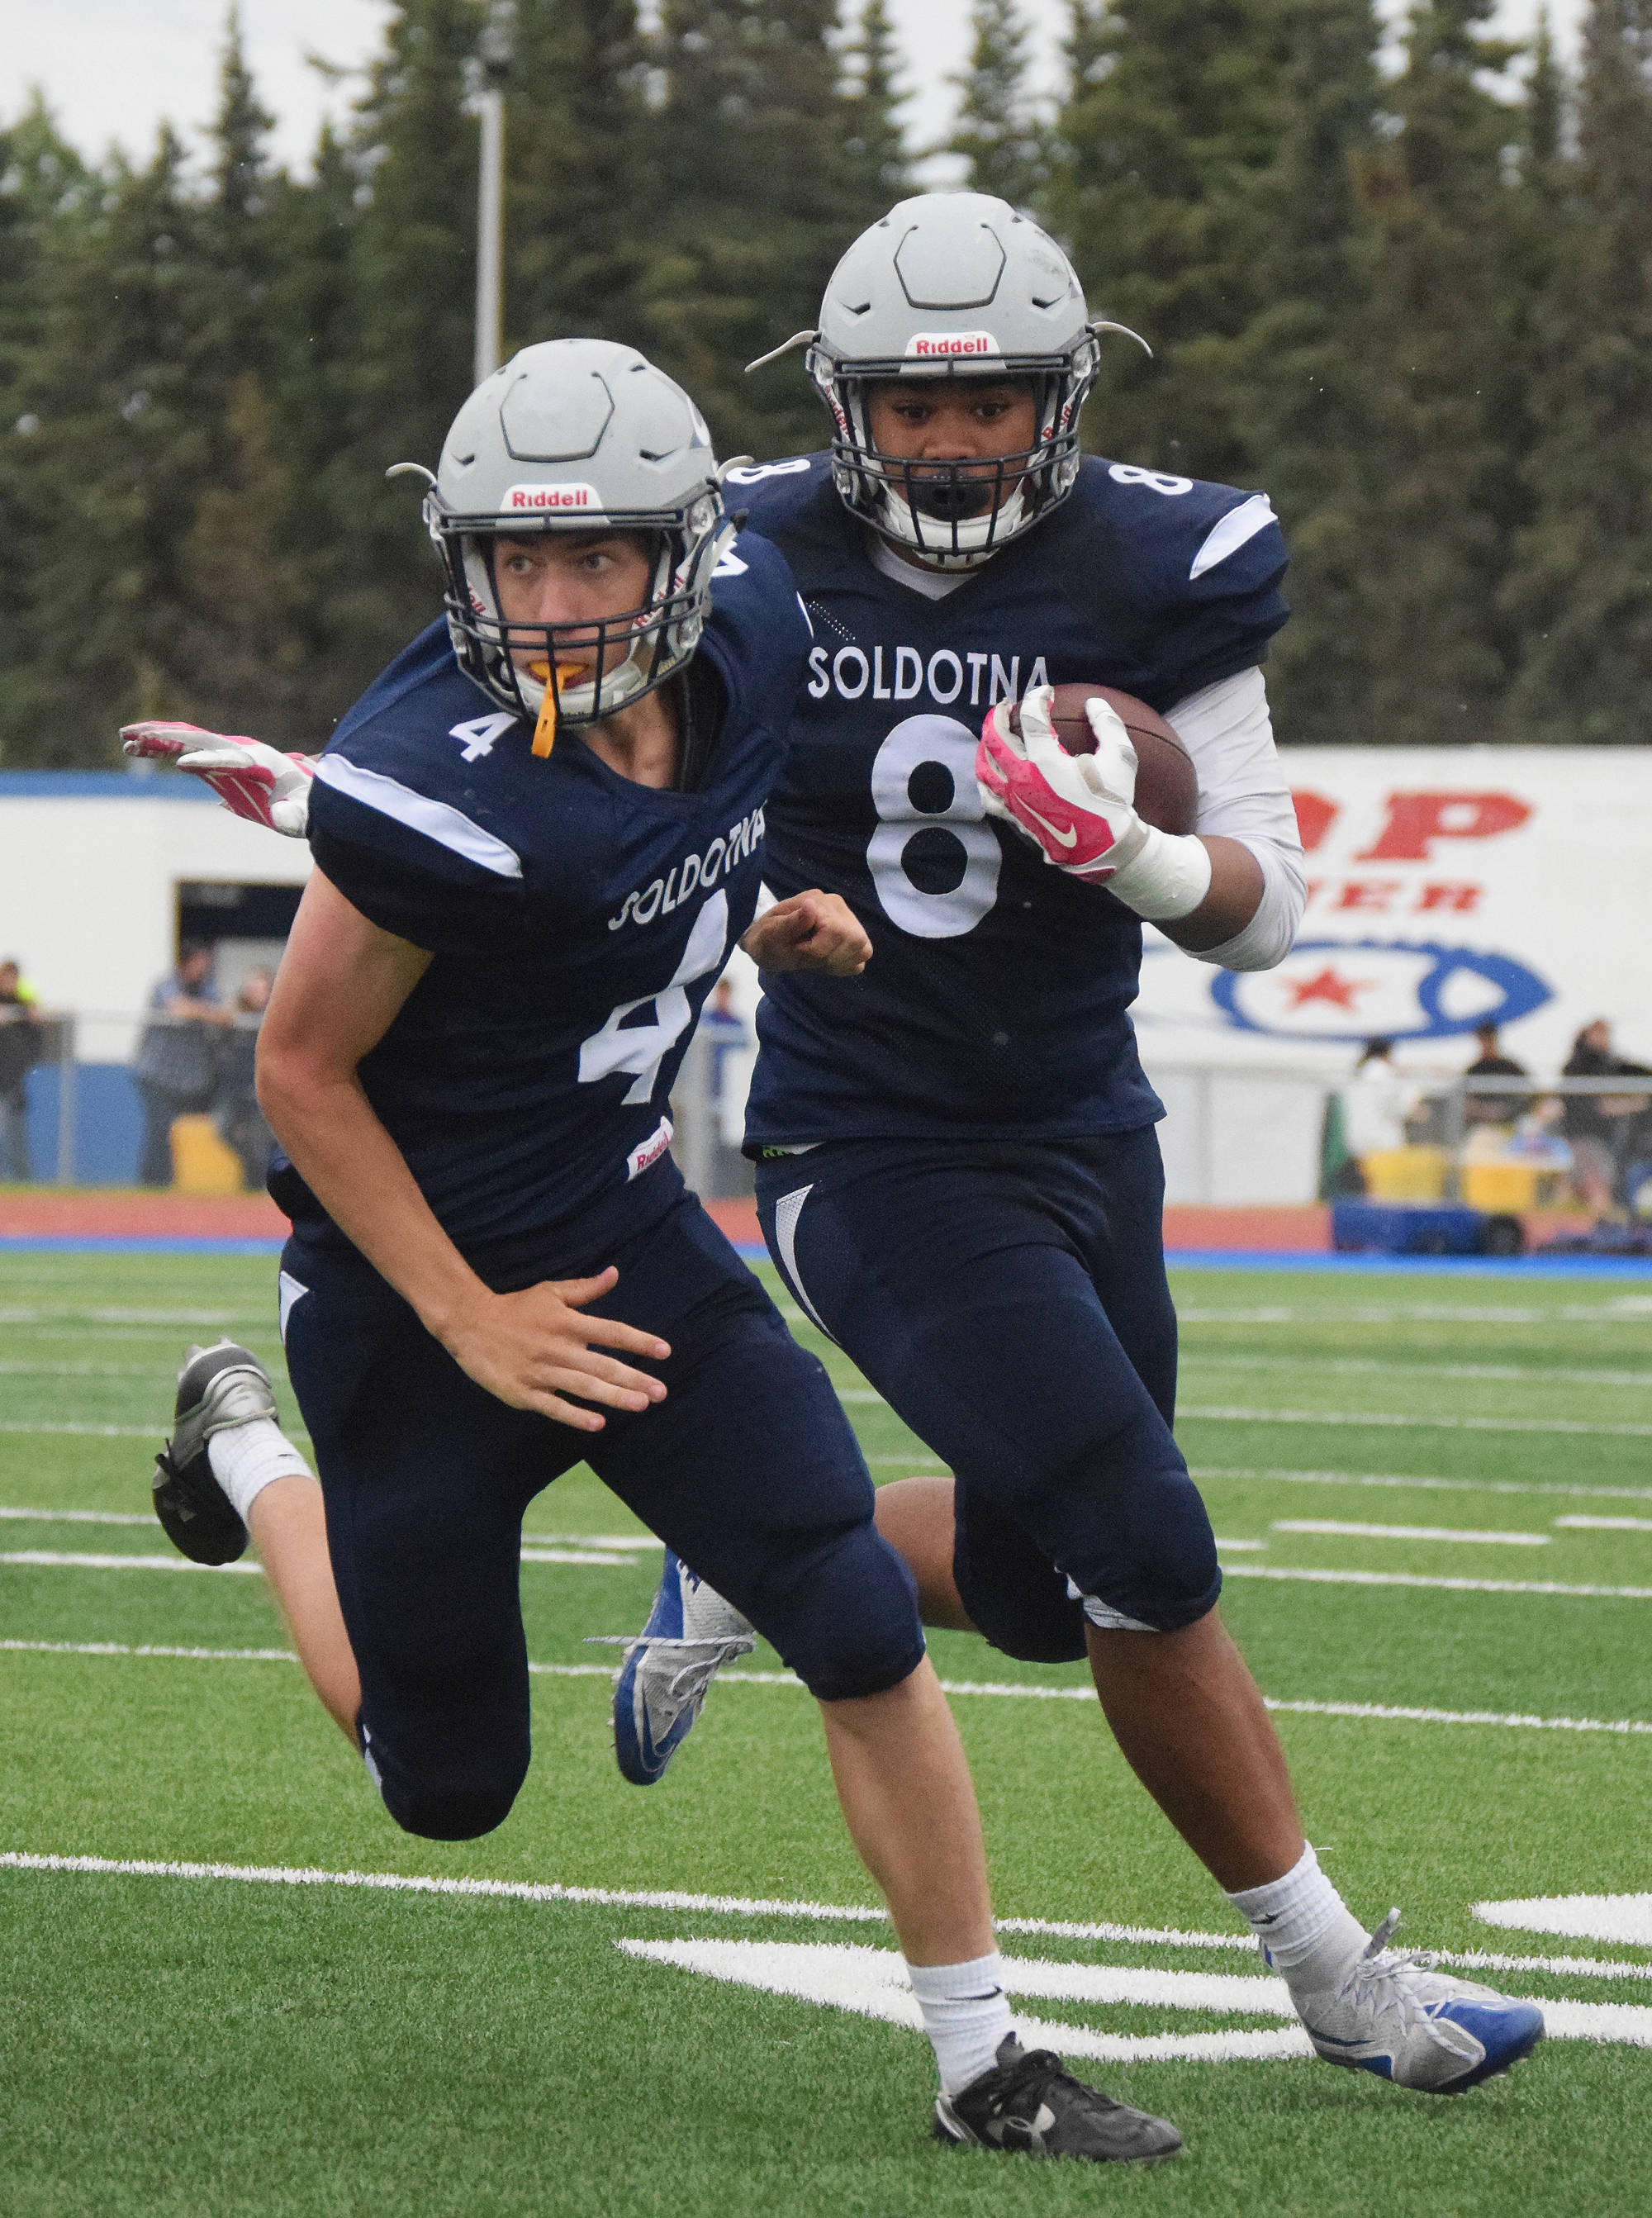 Soldotna junior Aaron Faletoi follows the block by teammate Jersey Truesdell Friday against West Anchorage at Justin Maile Field in Soldotna. (Photo by Joey Klecka/Peninsula Clarion)